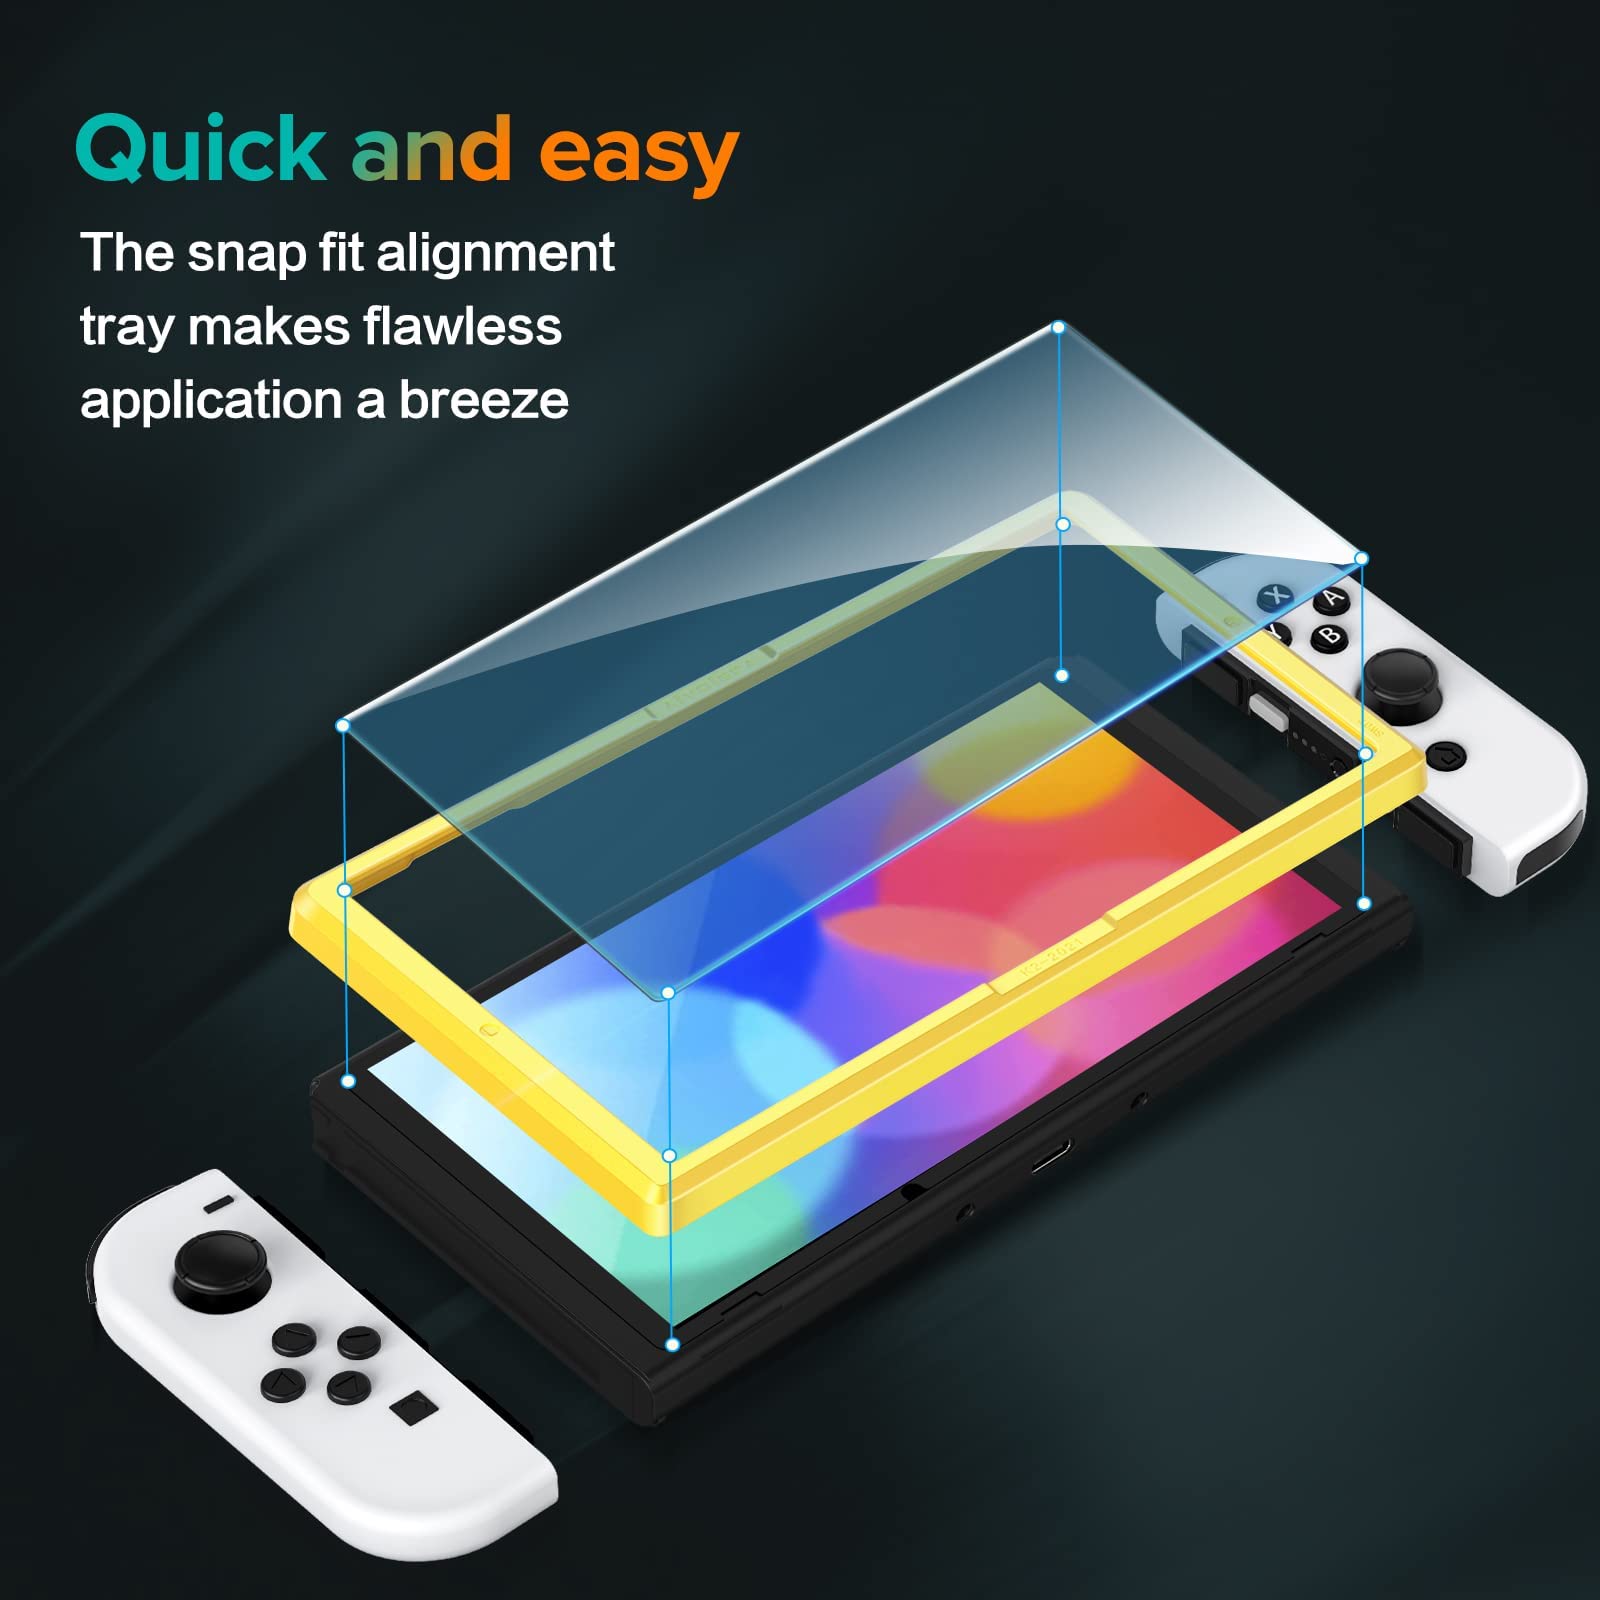 ivoler 4 Pack Screen Protector Compatible with Nintendo Switch OLED Model 7 '' 2021 with Easy Frame tool, Tempered Glass Protection Film - without air bubbles -Ultra Resistant Hardness 9H